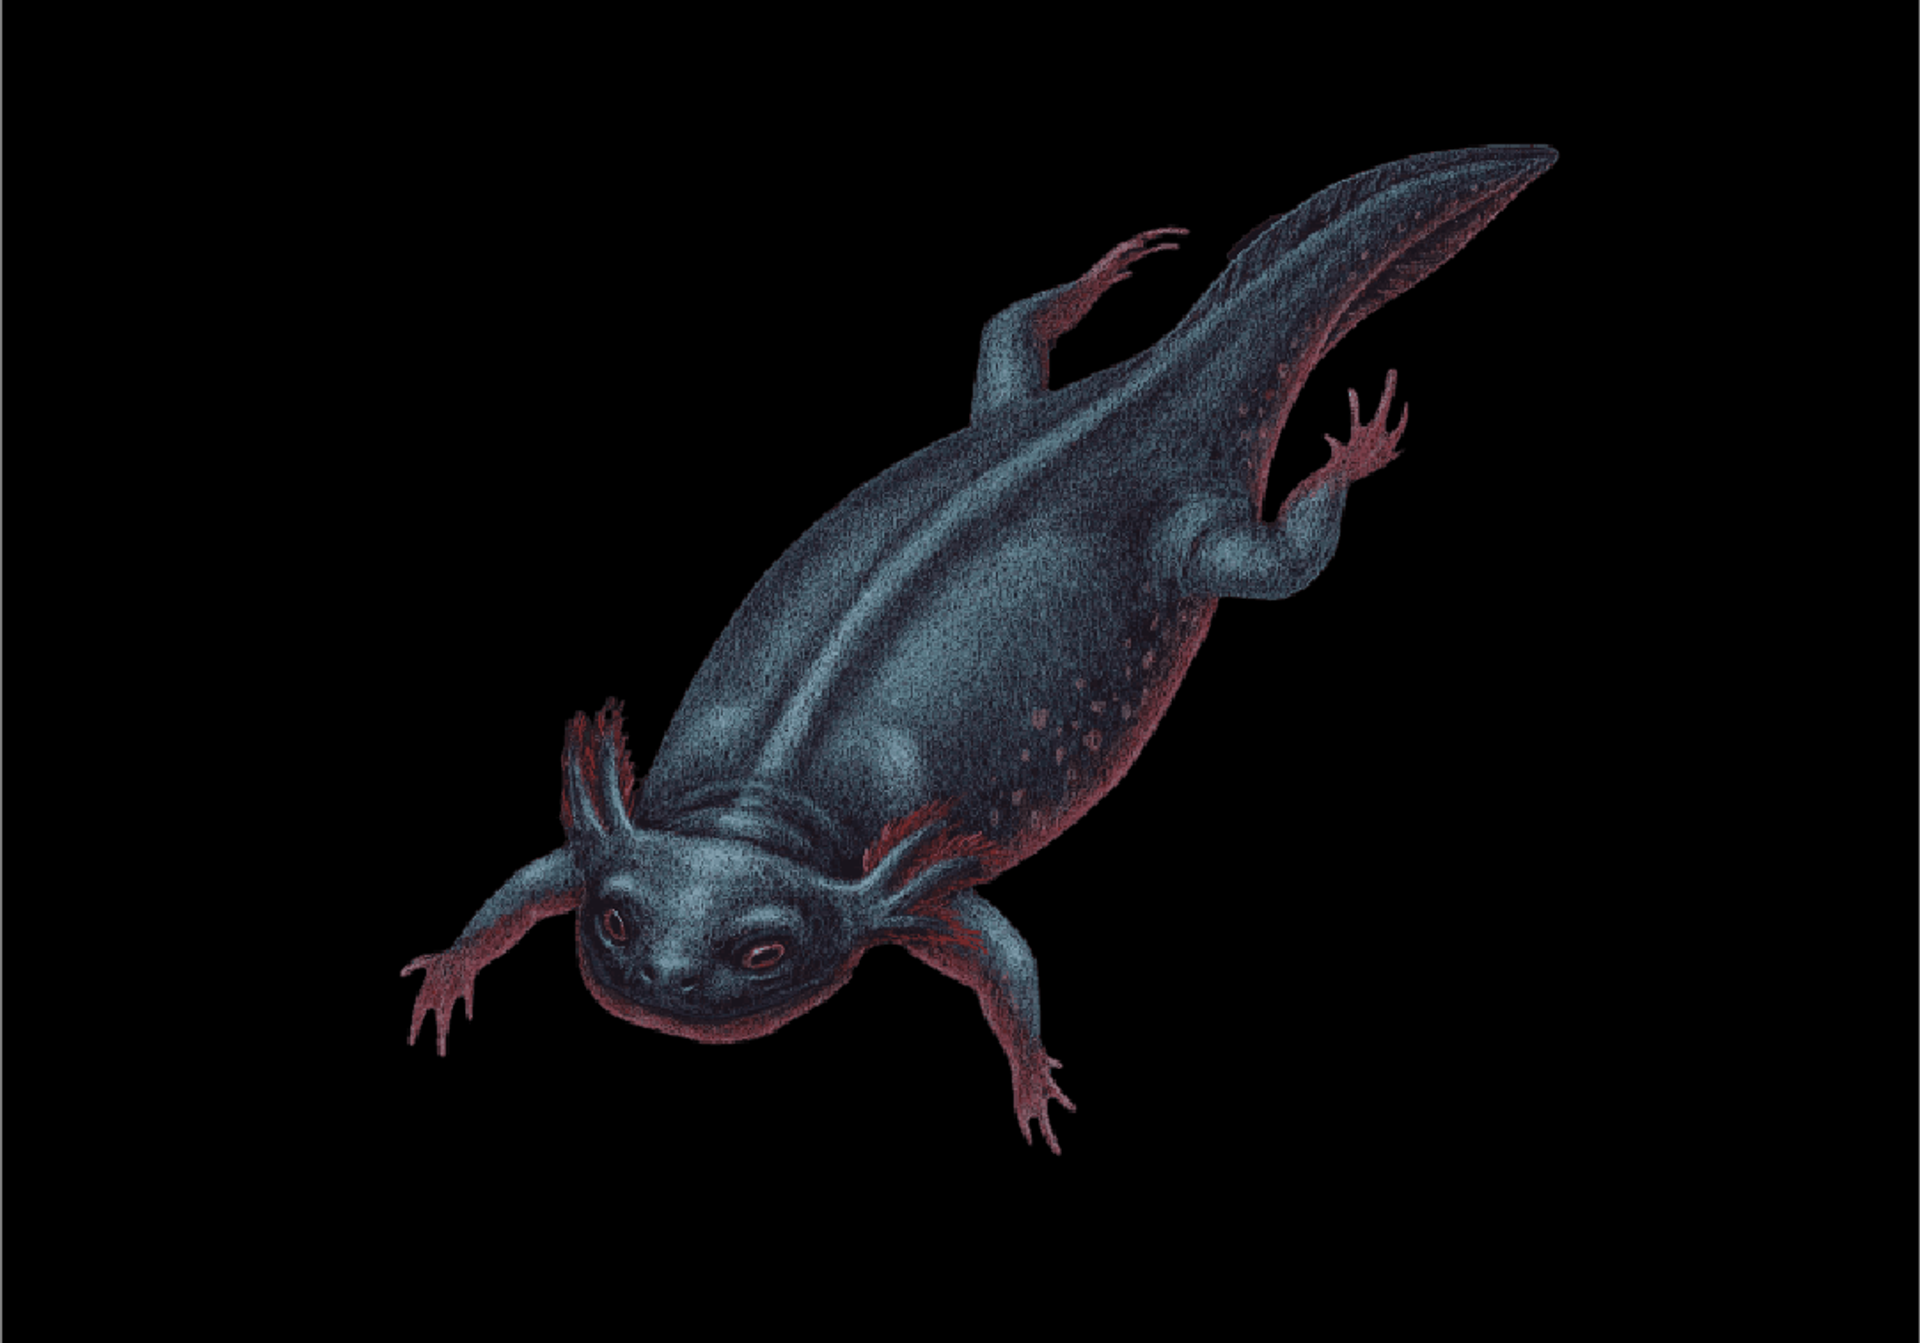 Here is an illustration of how a Apateon is believed to have looked like.